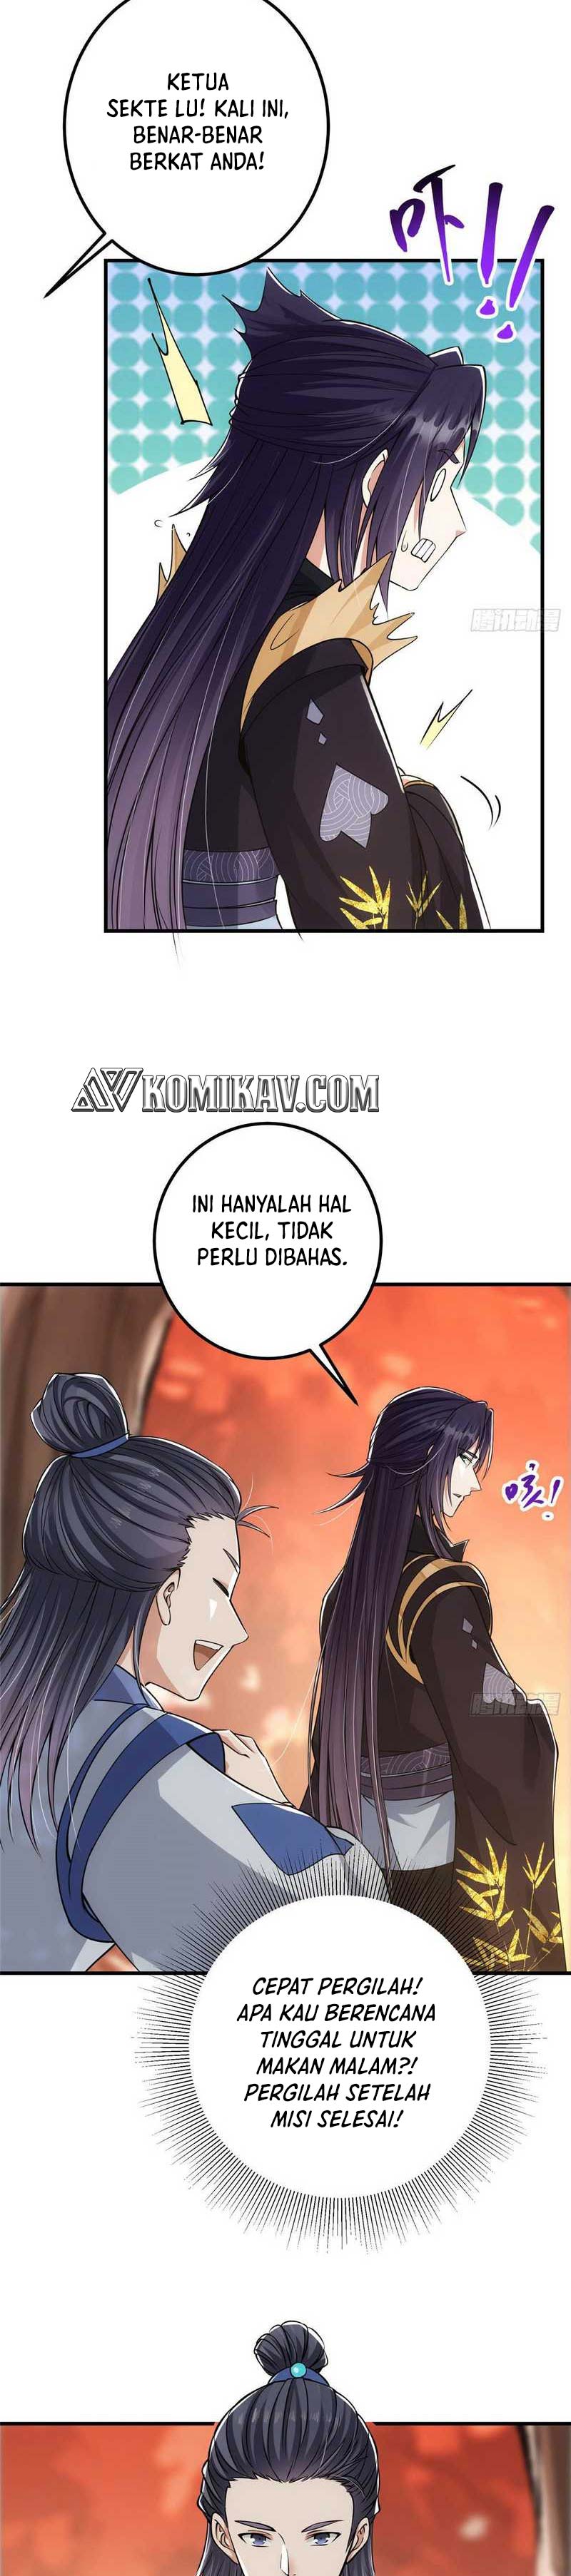 Keep A Low Profile, Sect Leader Chapter 43 Bahasa Indonesia